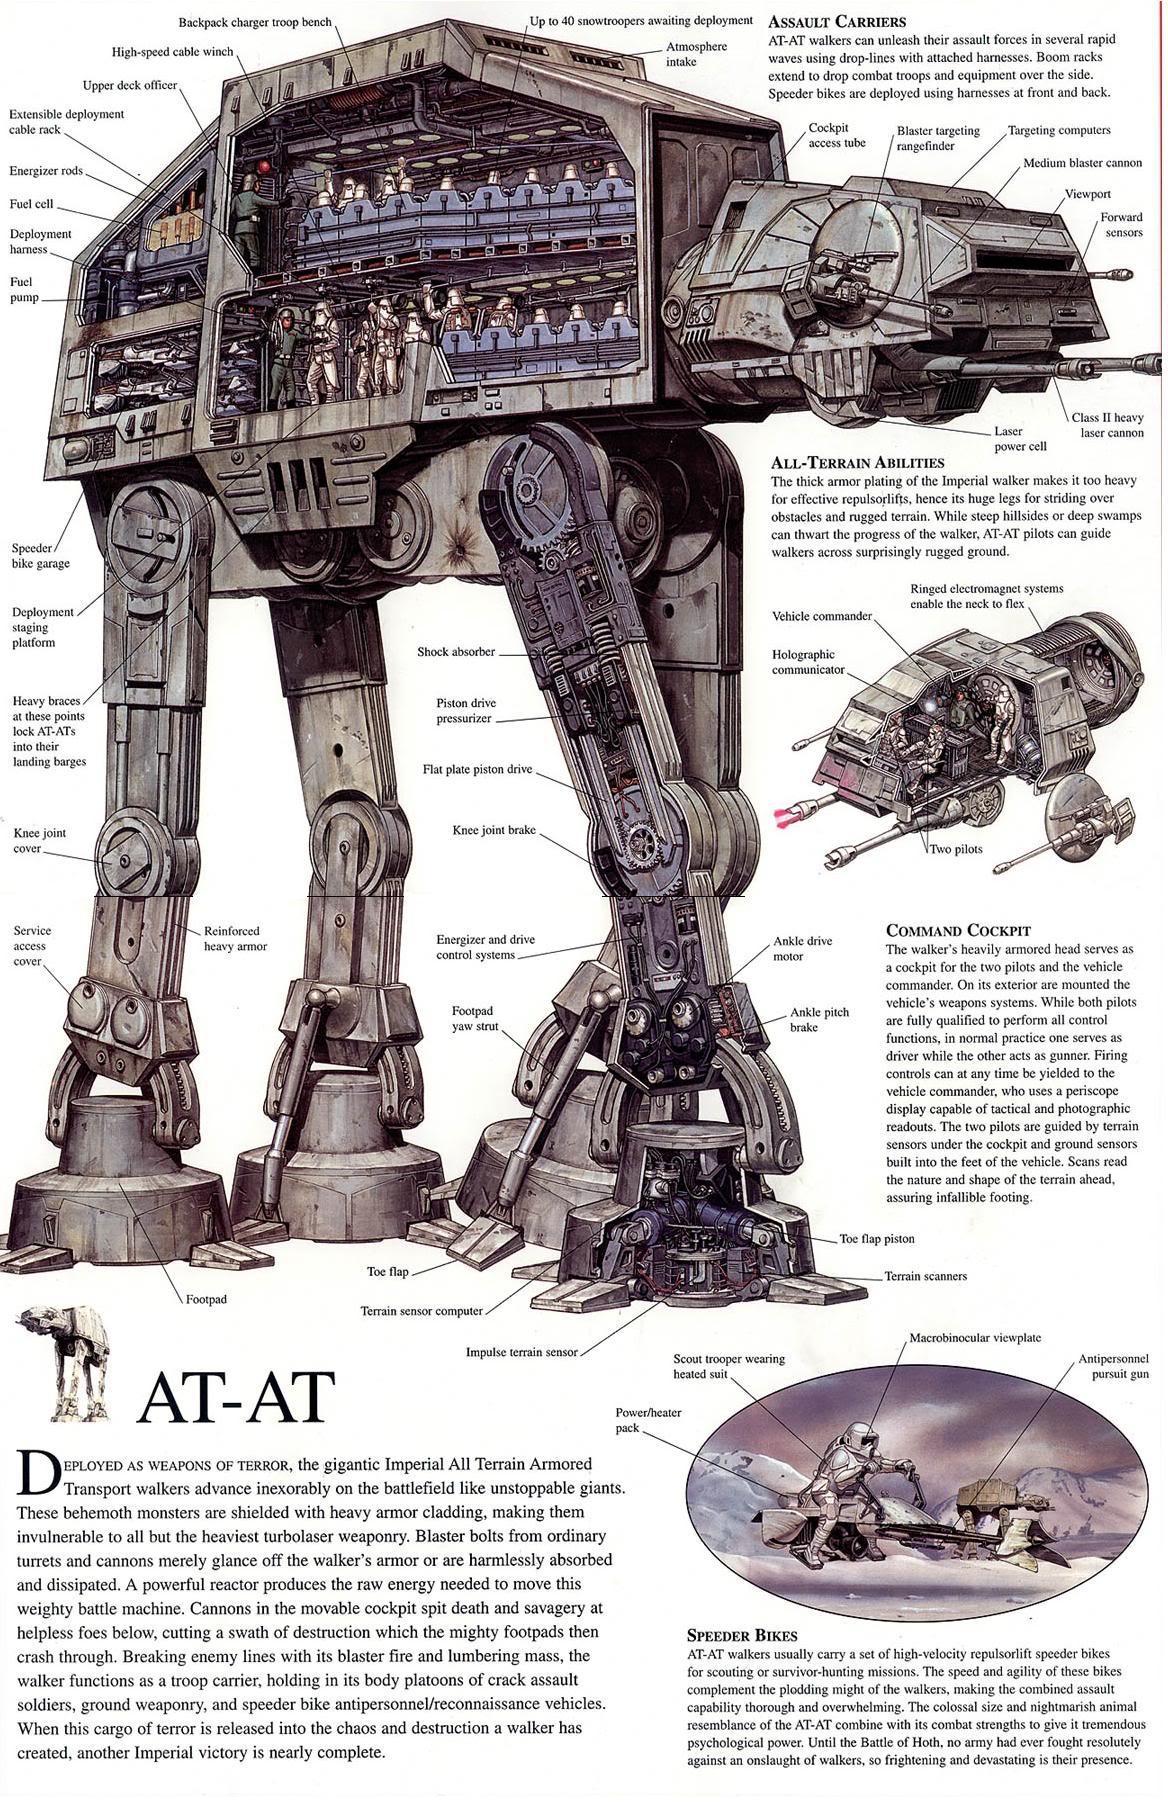 AT-AT Technology and Floor Overview